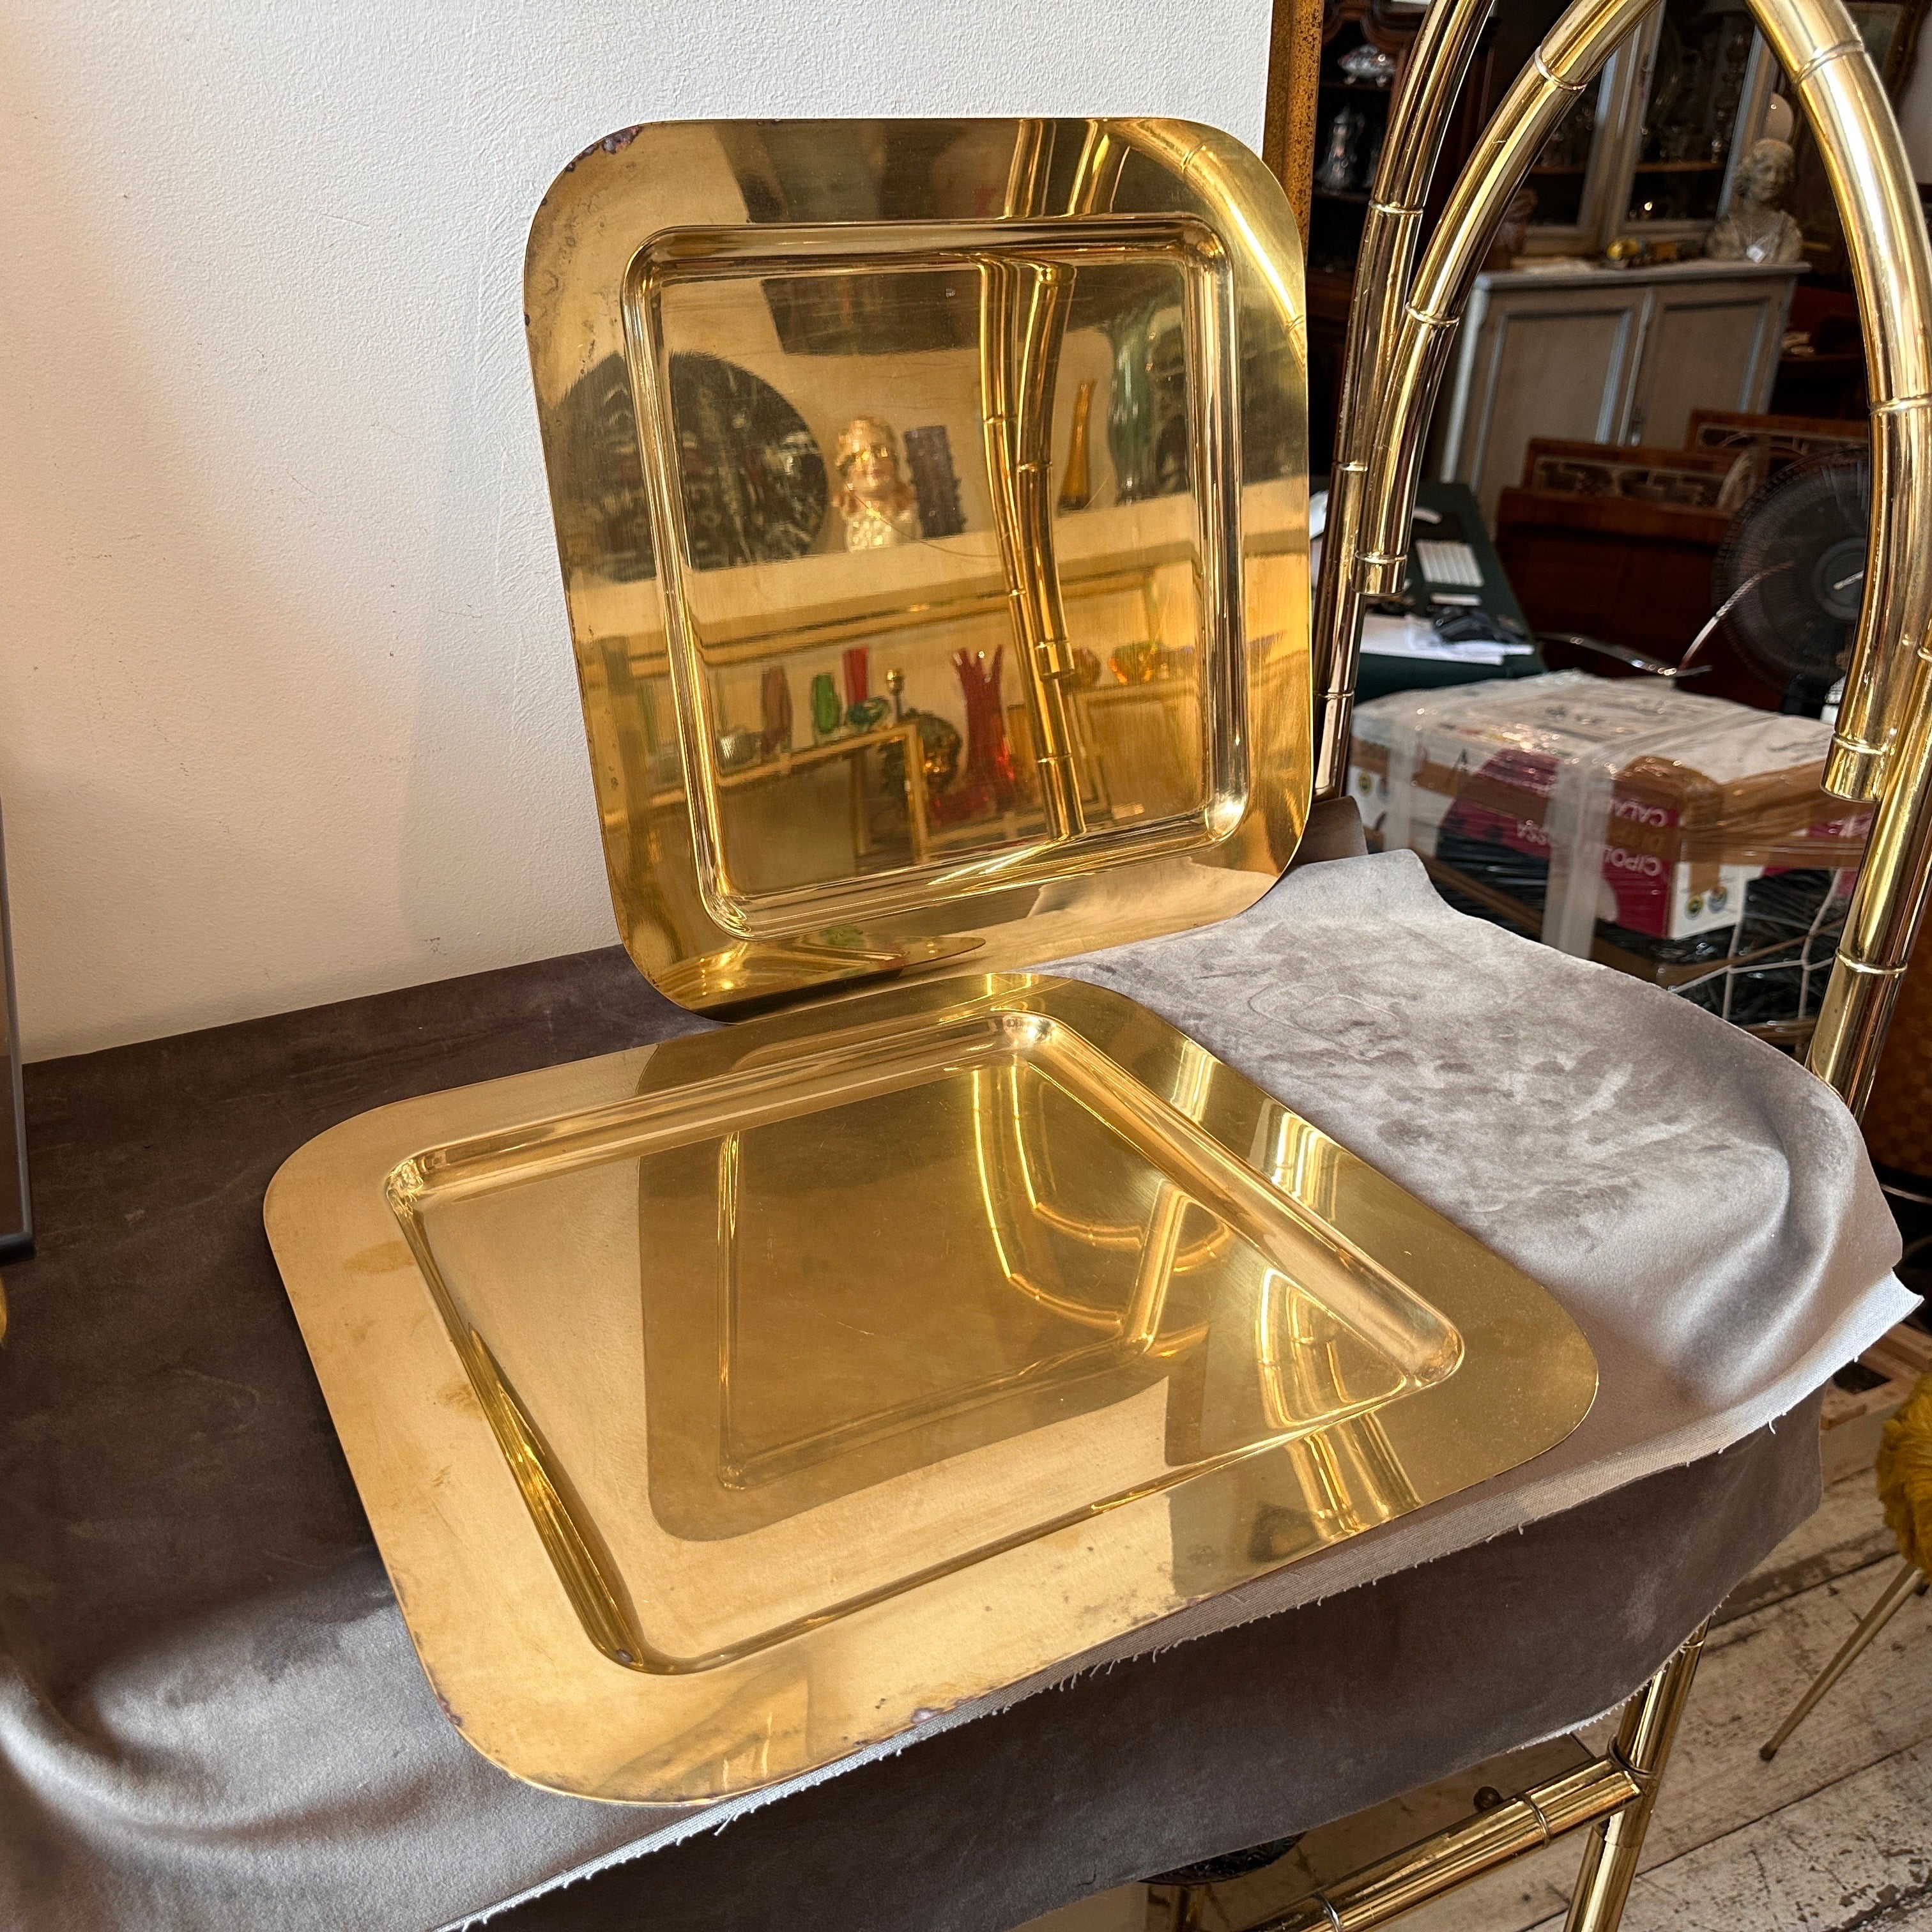 A pair of high quality solid brass square trays designed and manufactured in Italy in the Seventies, they are in original patina with normal signs of use and age.
These Trays exude the era's quintessential fusion of elegance, functionality, and